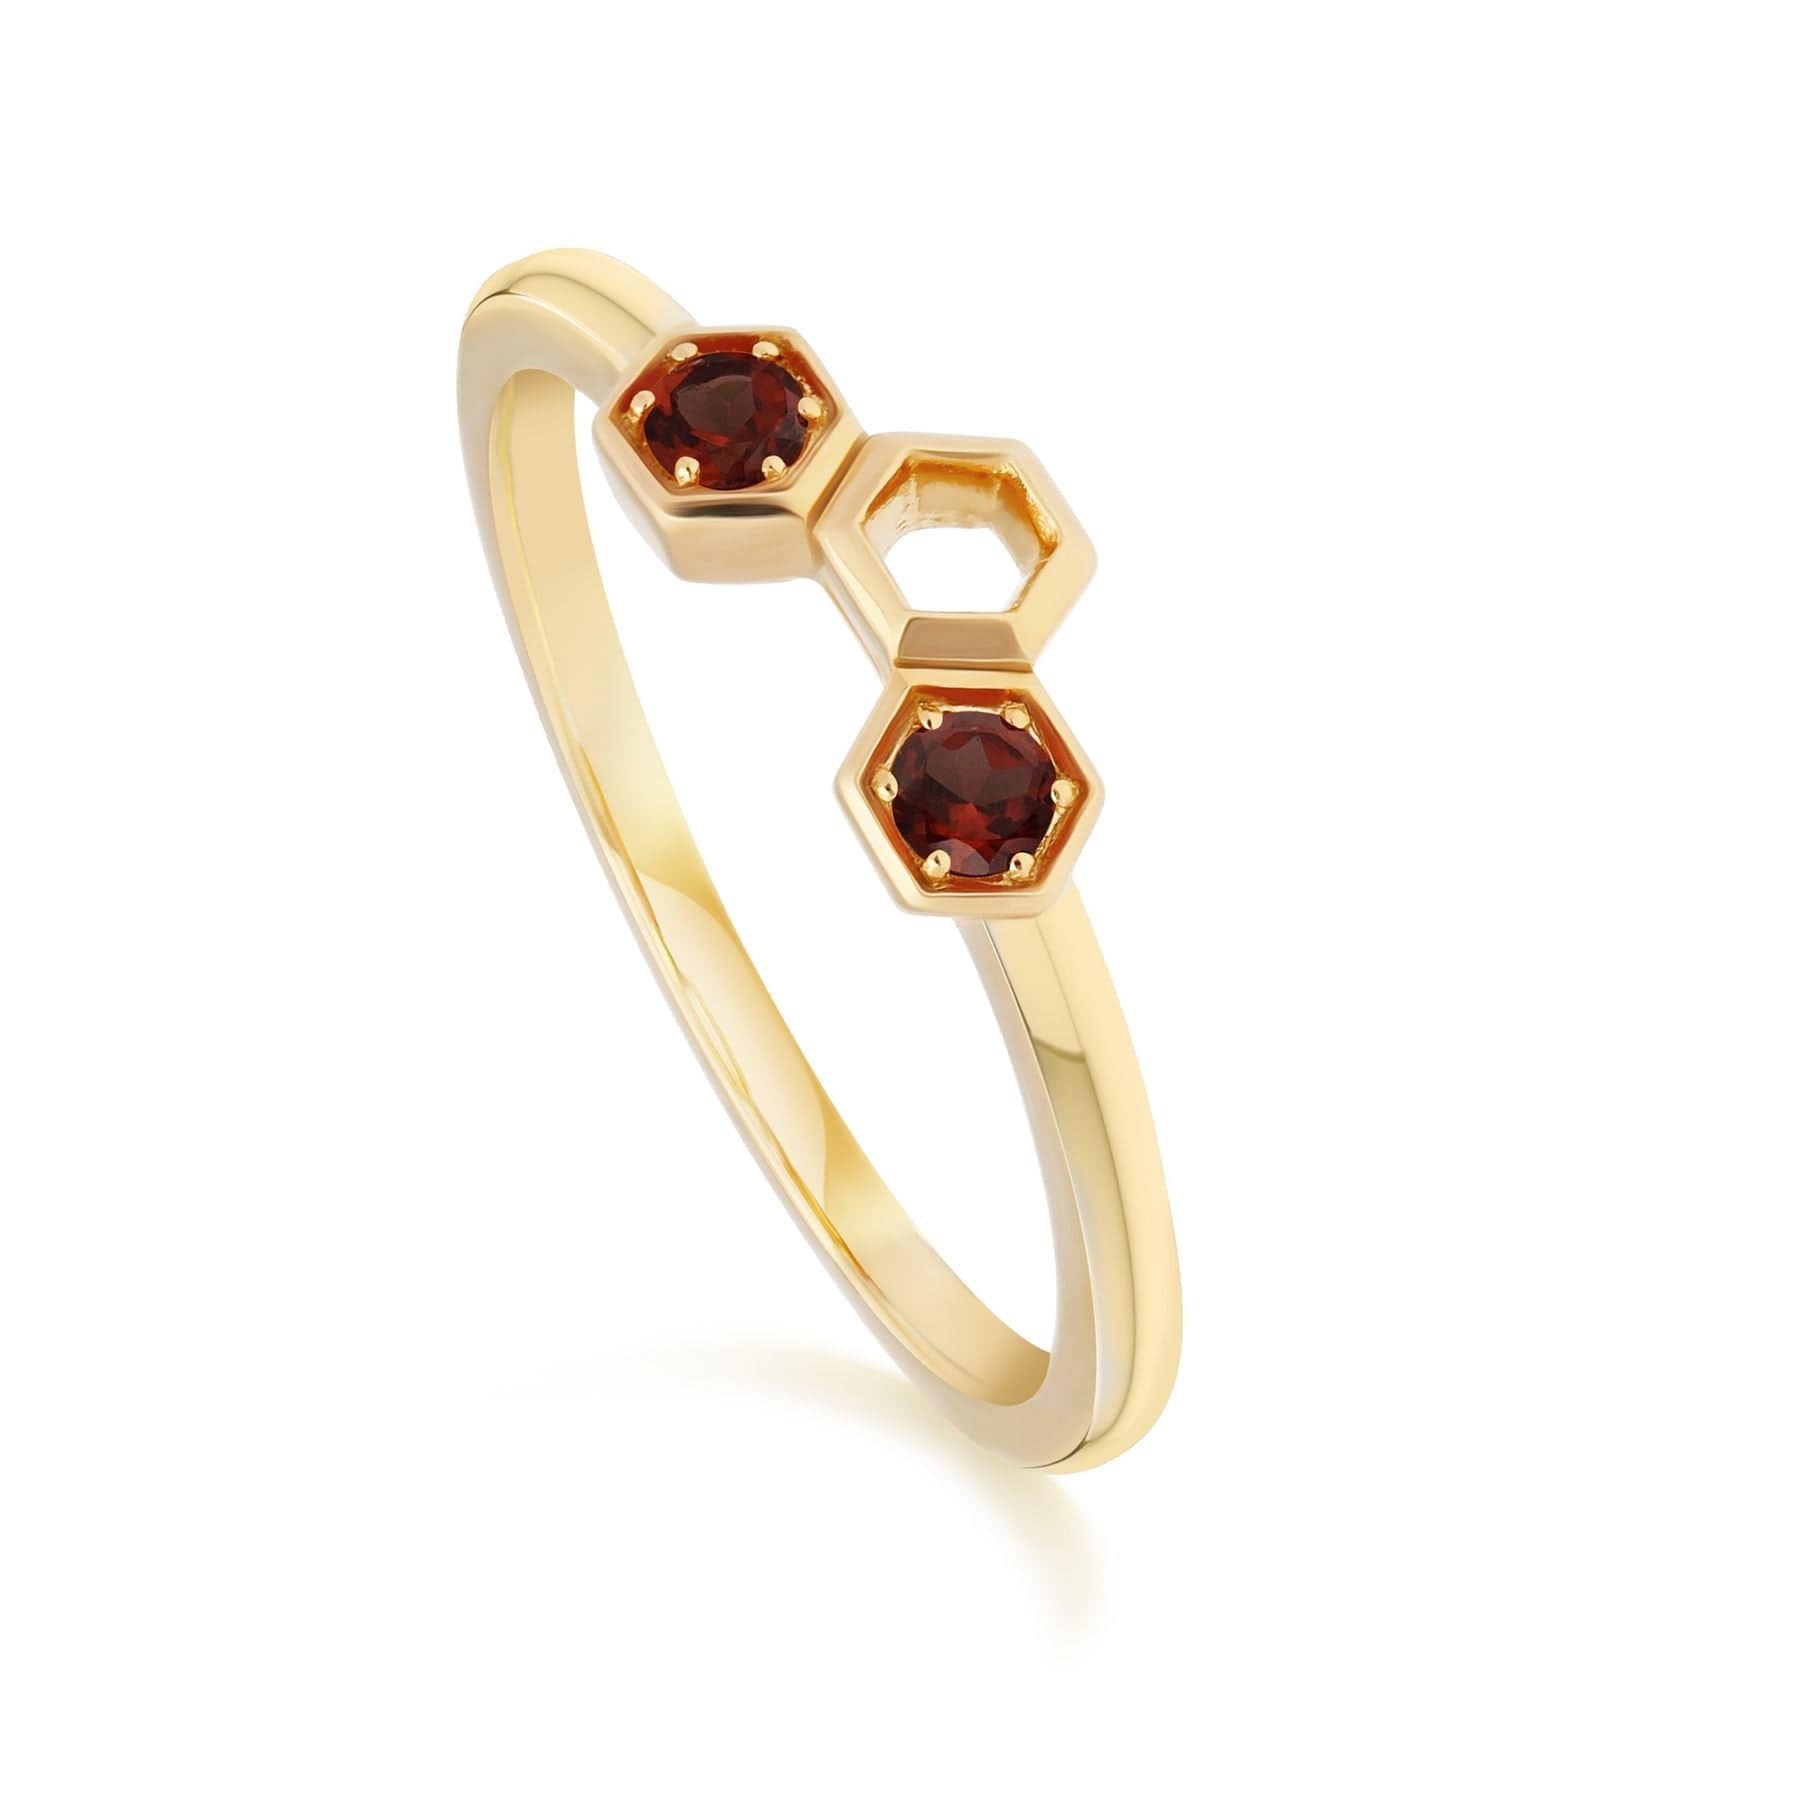 135R1838039 Honeycomb Inspired Garnet Stack Ring in 9ct Yellow Gold 1